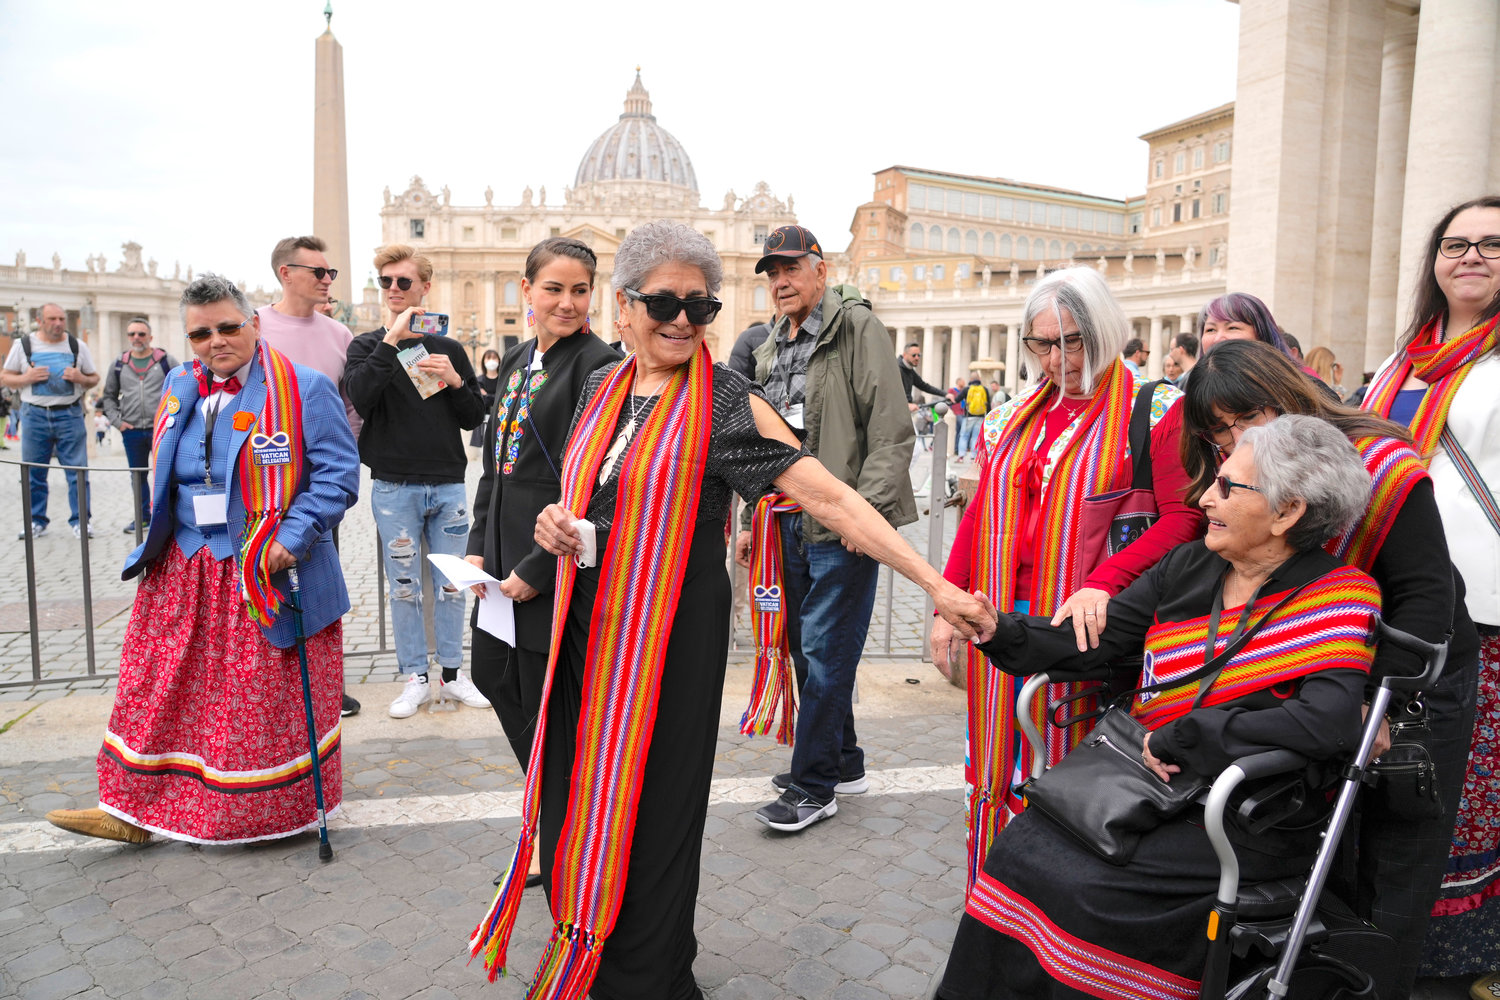 President of the Metis community, Cassidy Caron, at center in black outfit, and other delegates arrive to speak to the media in St. Peter’s Square after their meeting with Pope Francis at The Vatican, Monday, March 28. Pope Francis is going ahead with his plan to visit Canada this summer so he can apologize in person for abuse suffered by Indigenous peoples at the hands of the Catholic church.